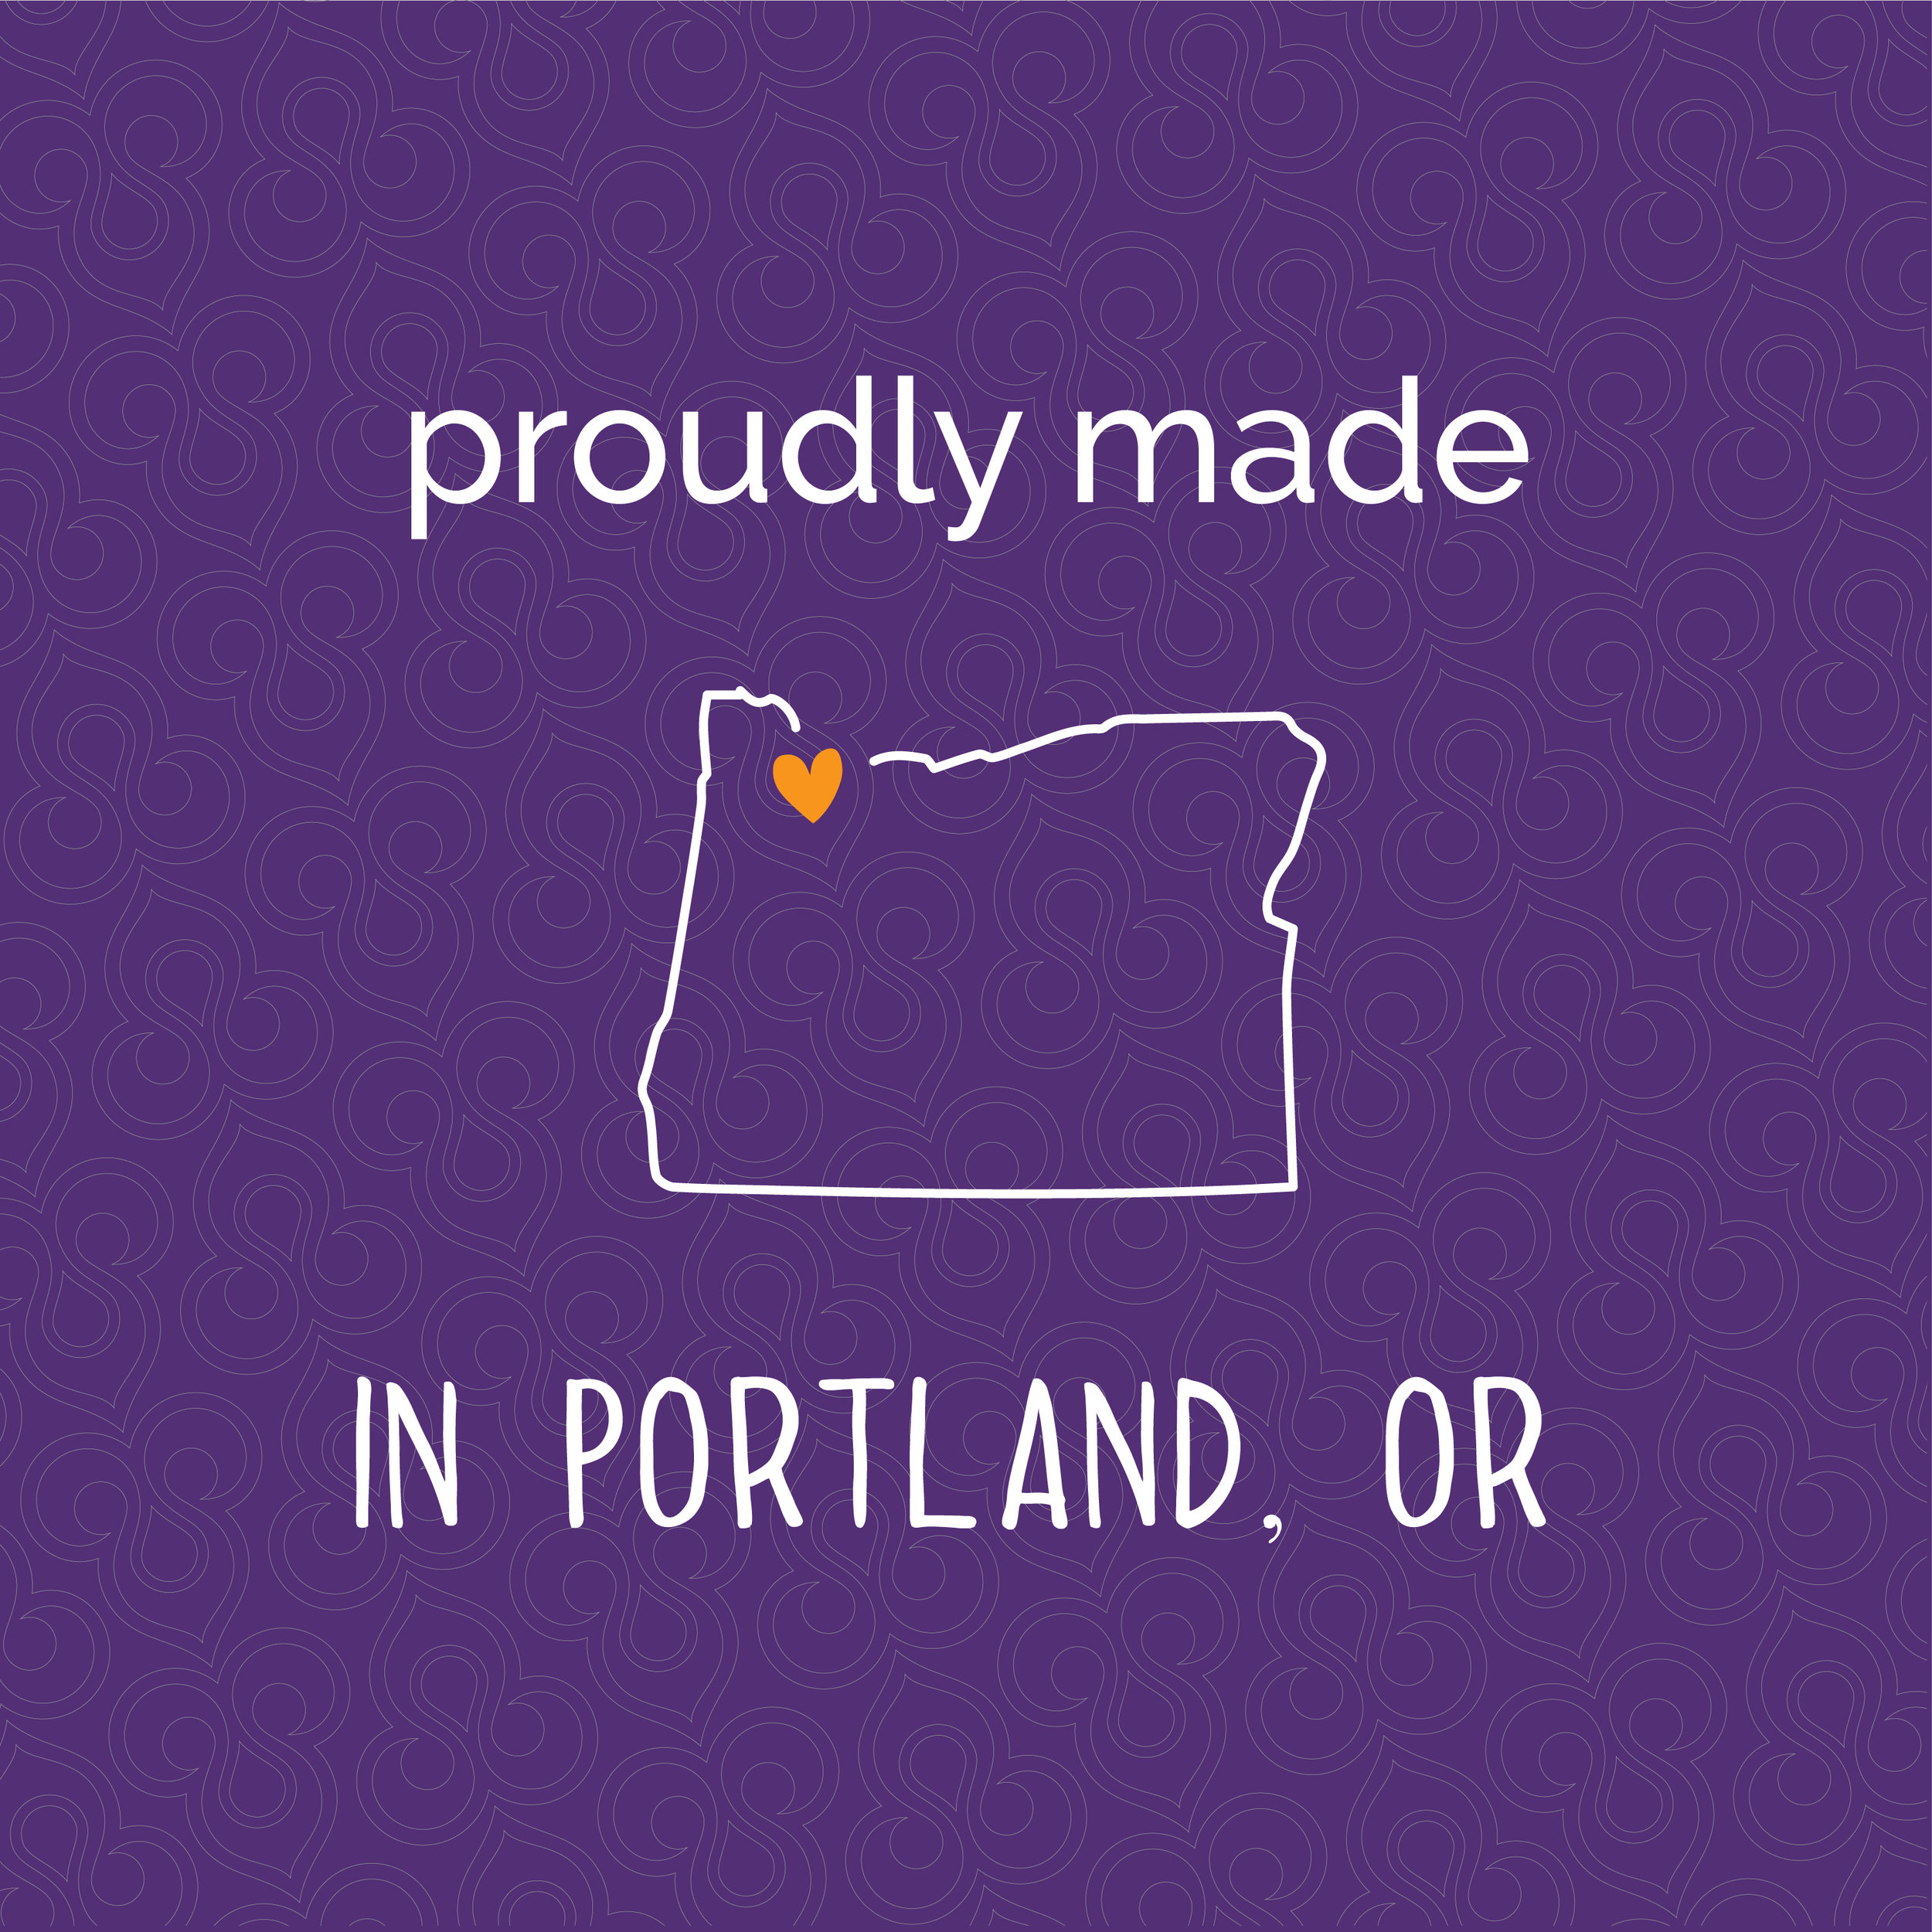 Proudly made in PDX.jpg